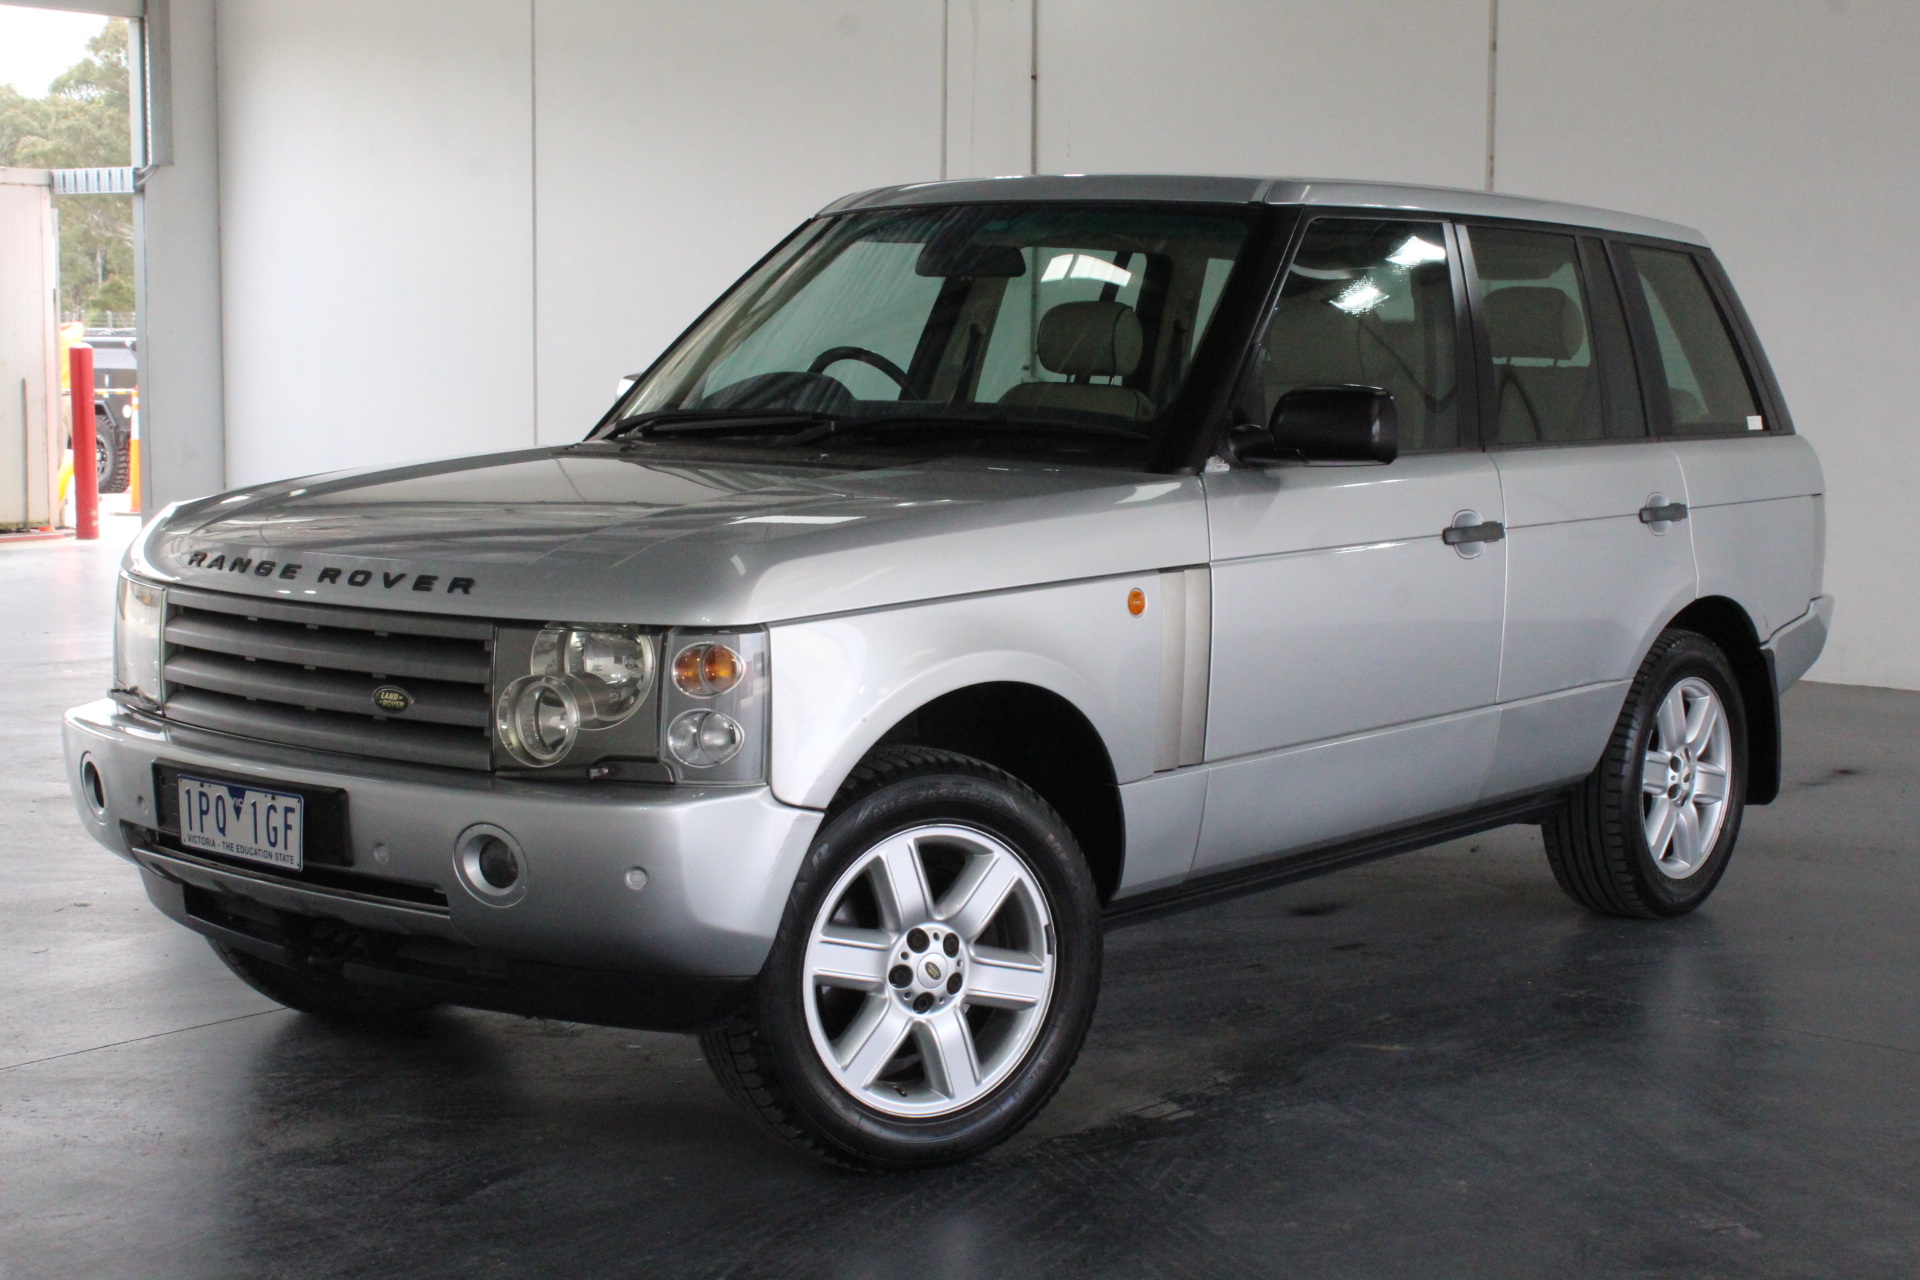 2002 Land Rover Range Rover HSE Automatic Wagon Auction